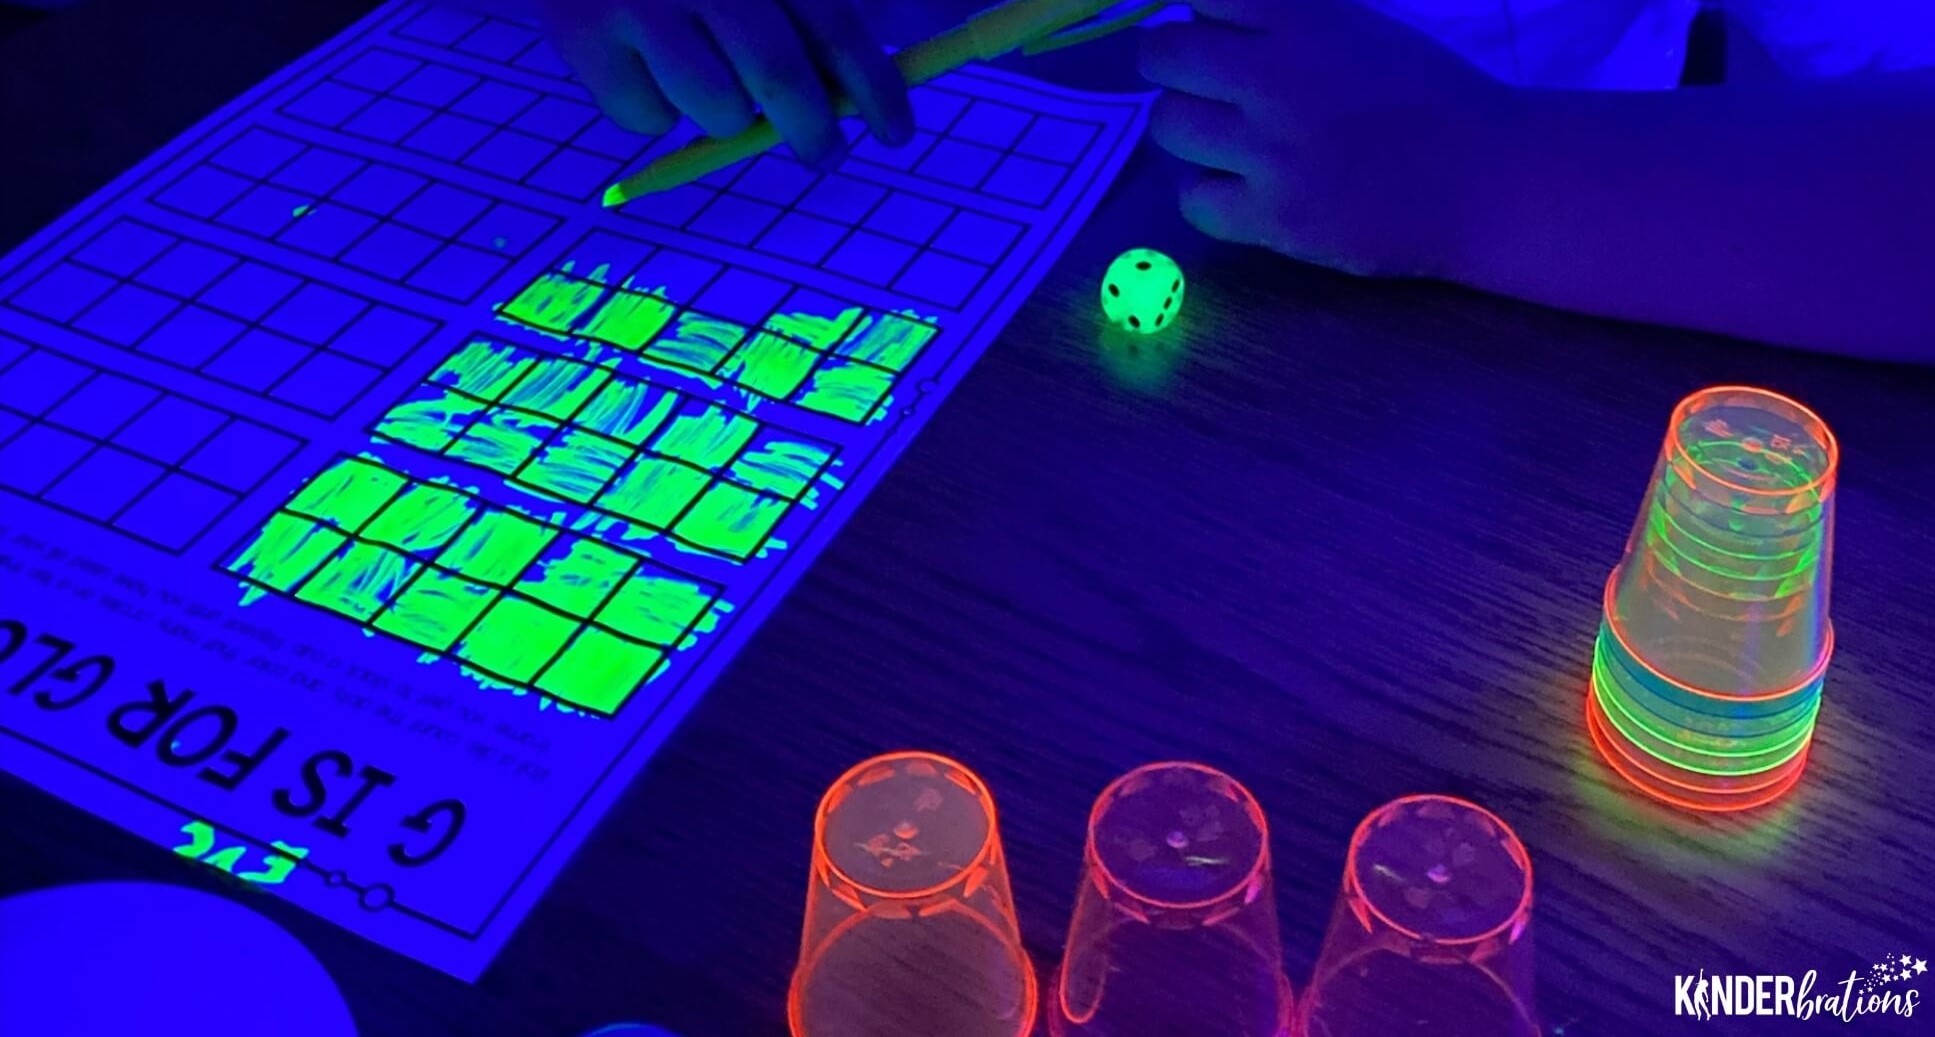 Amazing Glow Day Recording Sheet Activity For Kids - Hosting a GLOW DAY in your room